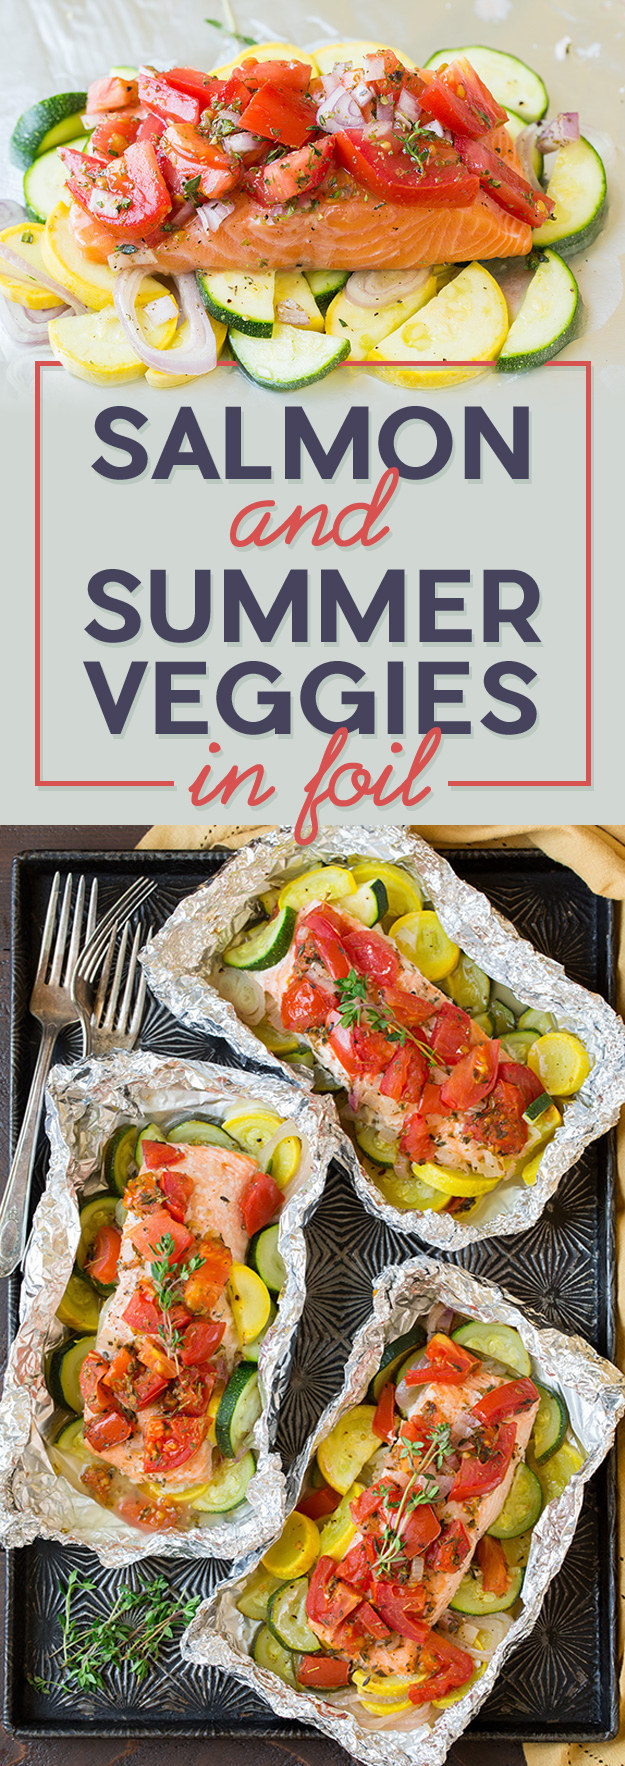 Salmon and Summer Veggies In Foil